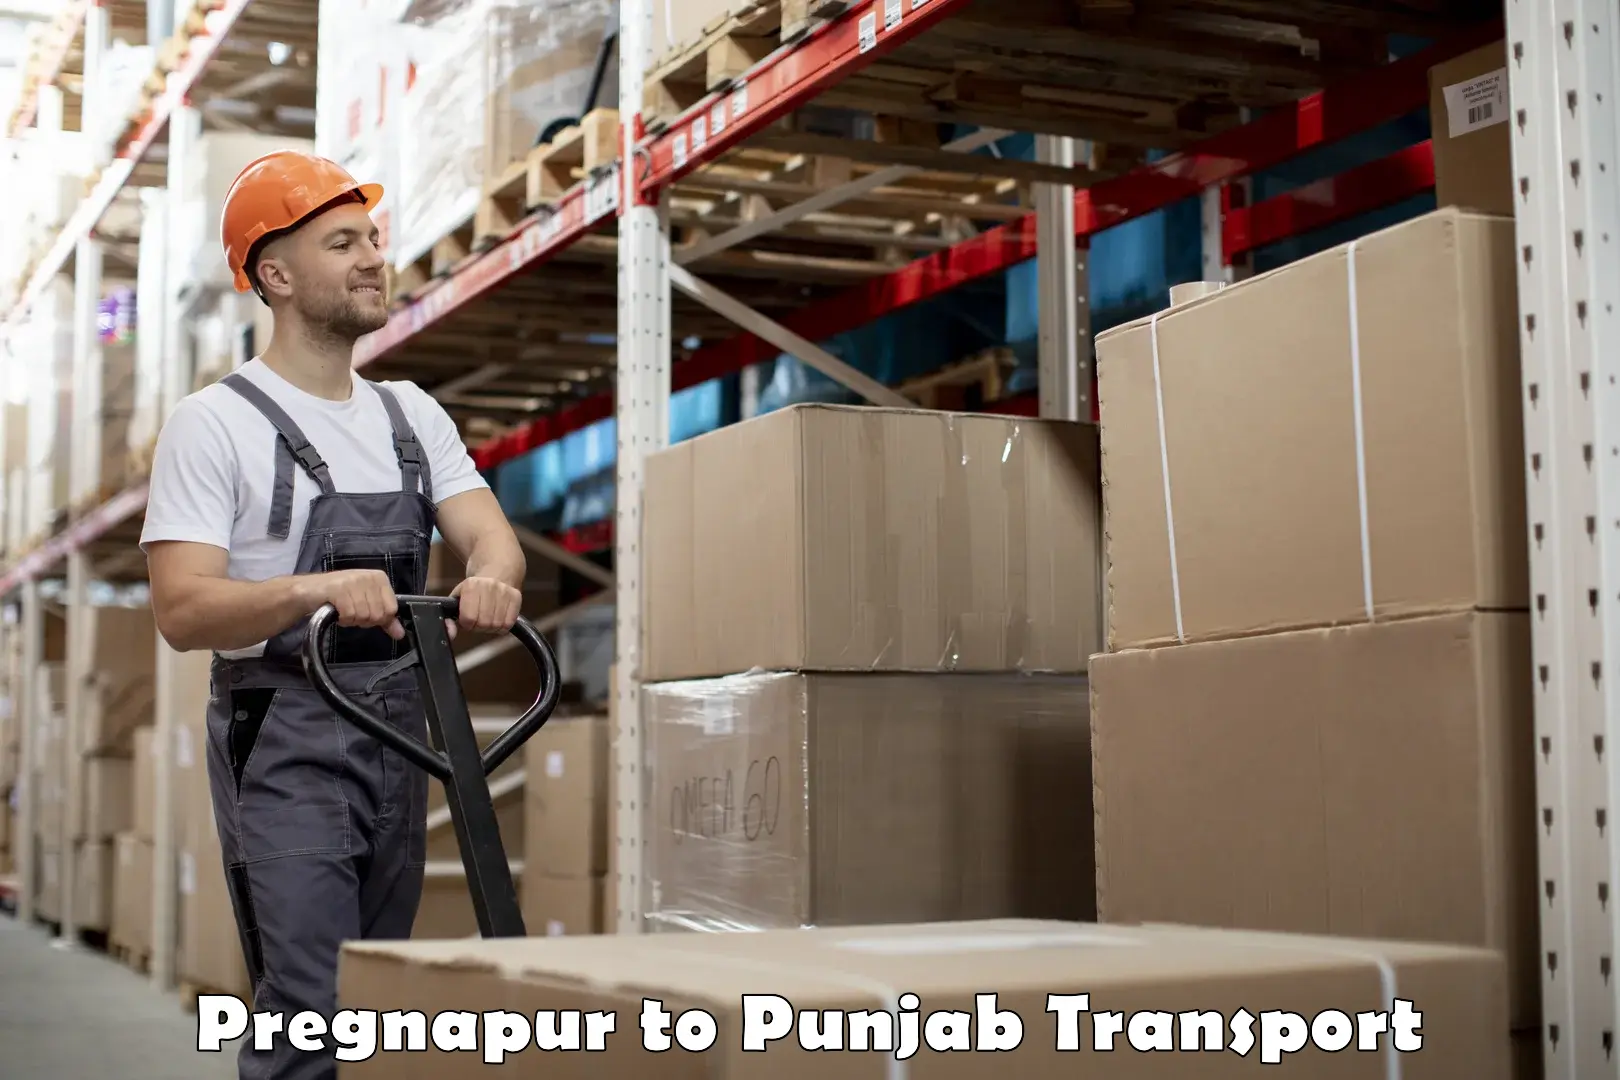 Container transport service Pregnapur to Malout